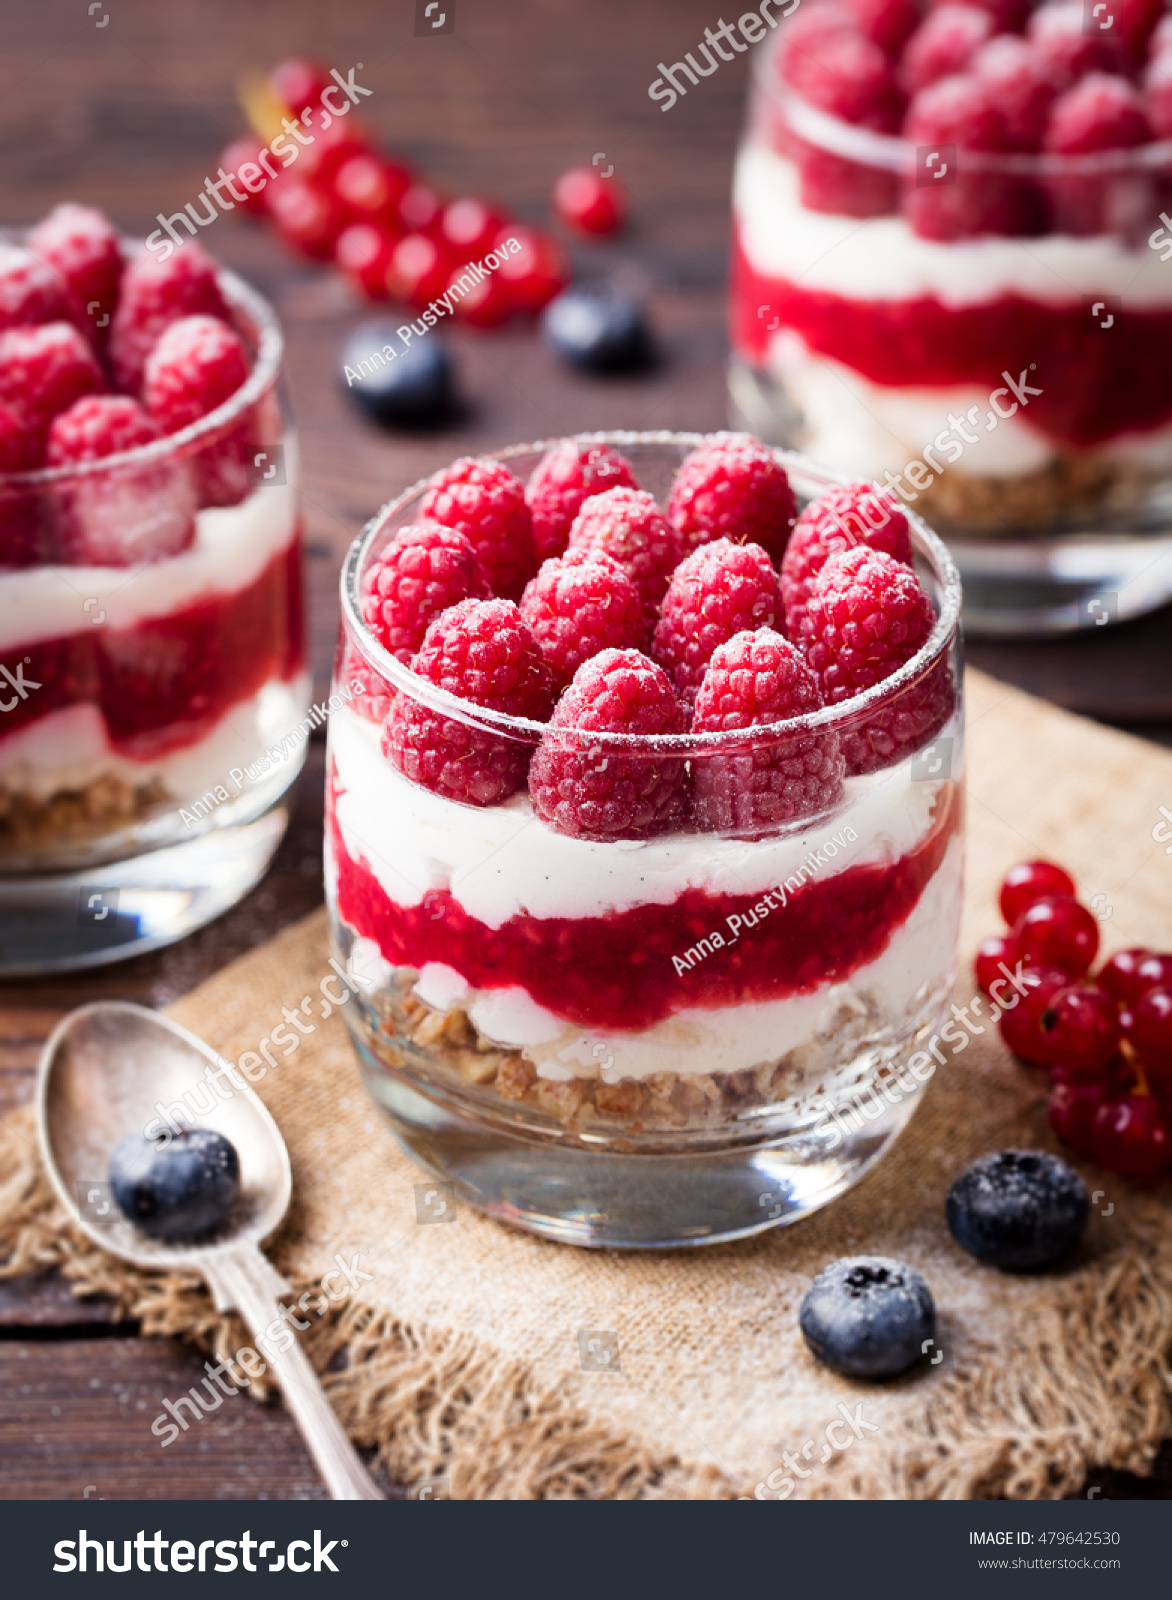 Raspberry dessert, cheesecake, trifle, mouse in a glass on a wooden background #479642530